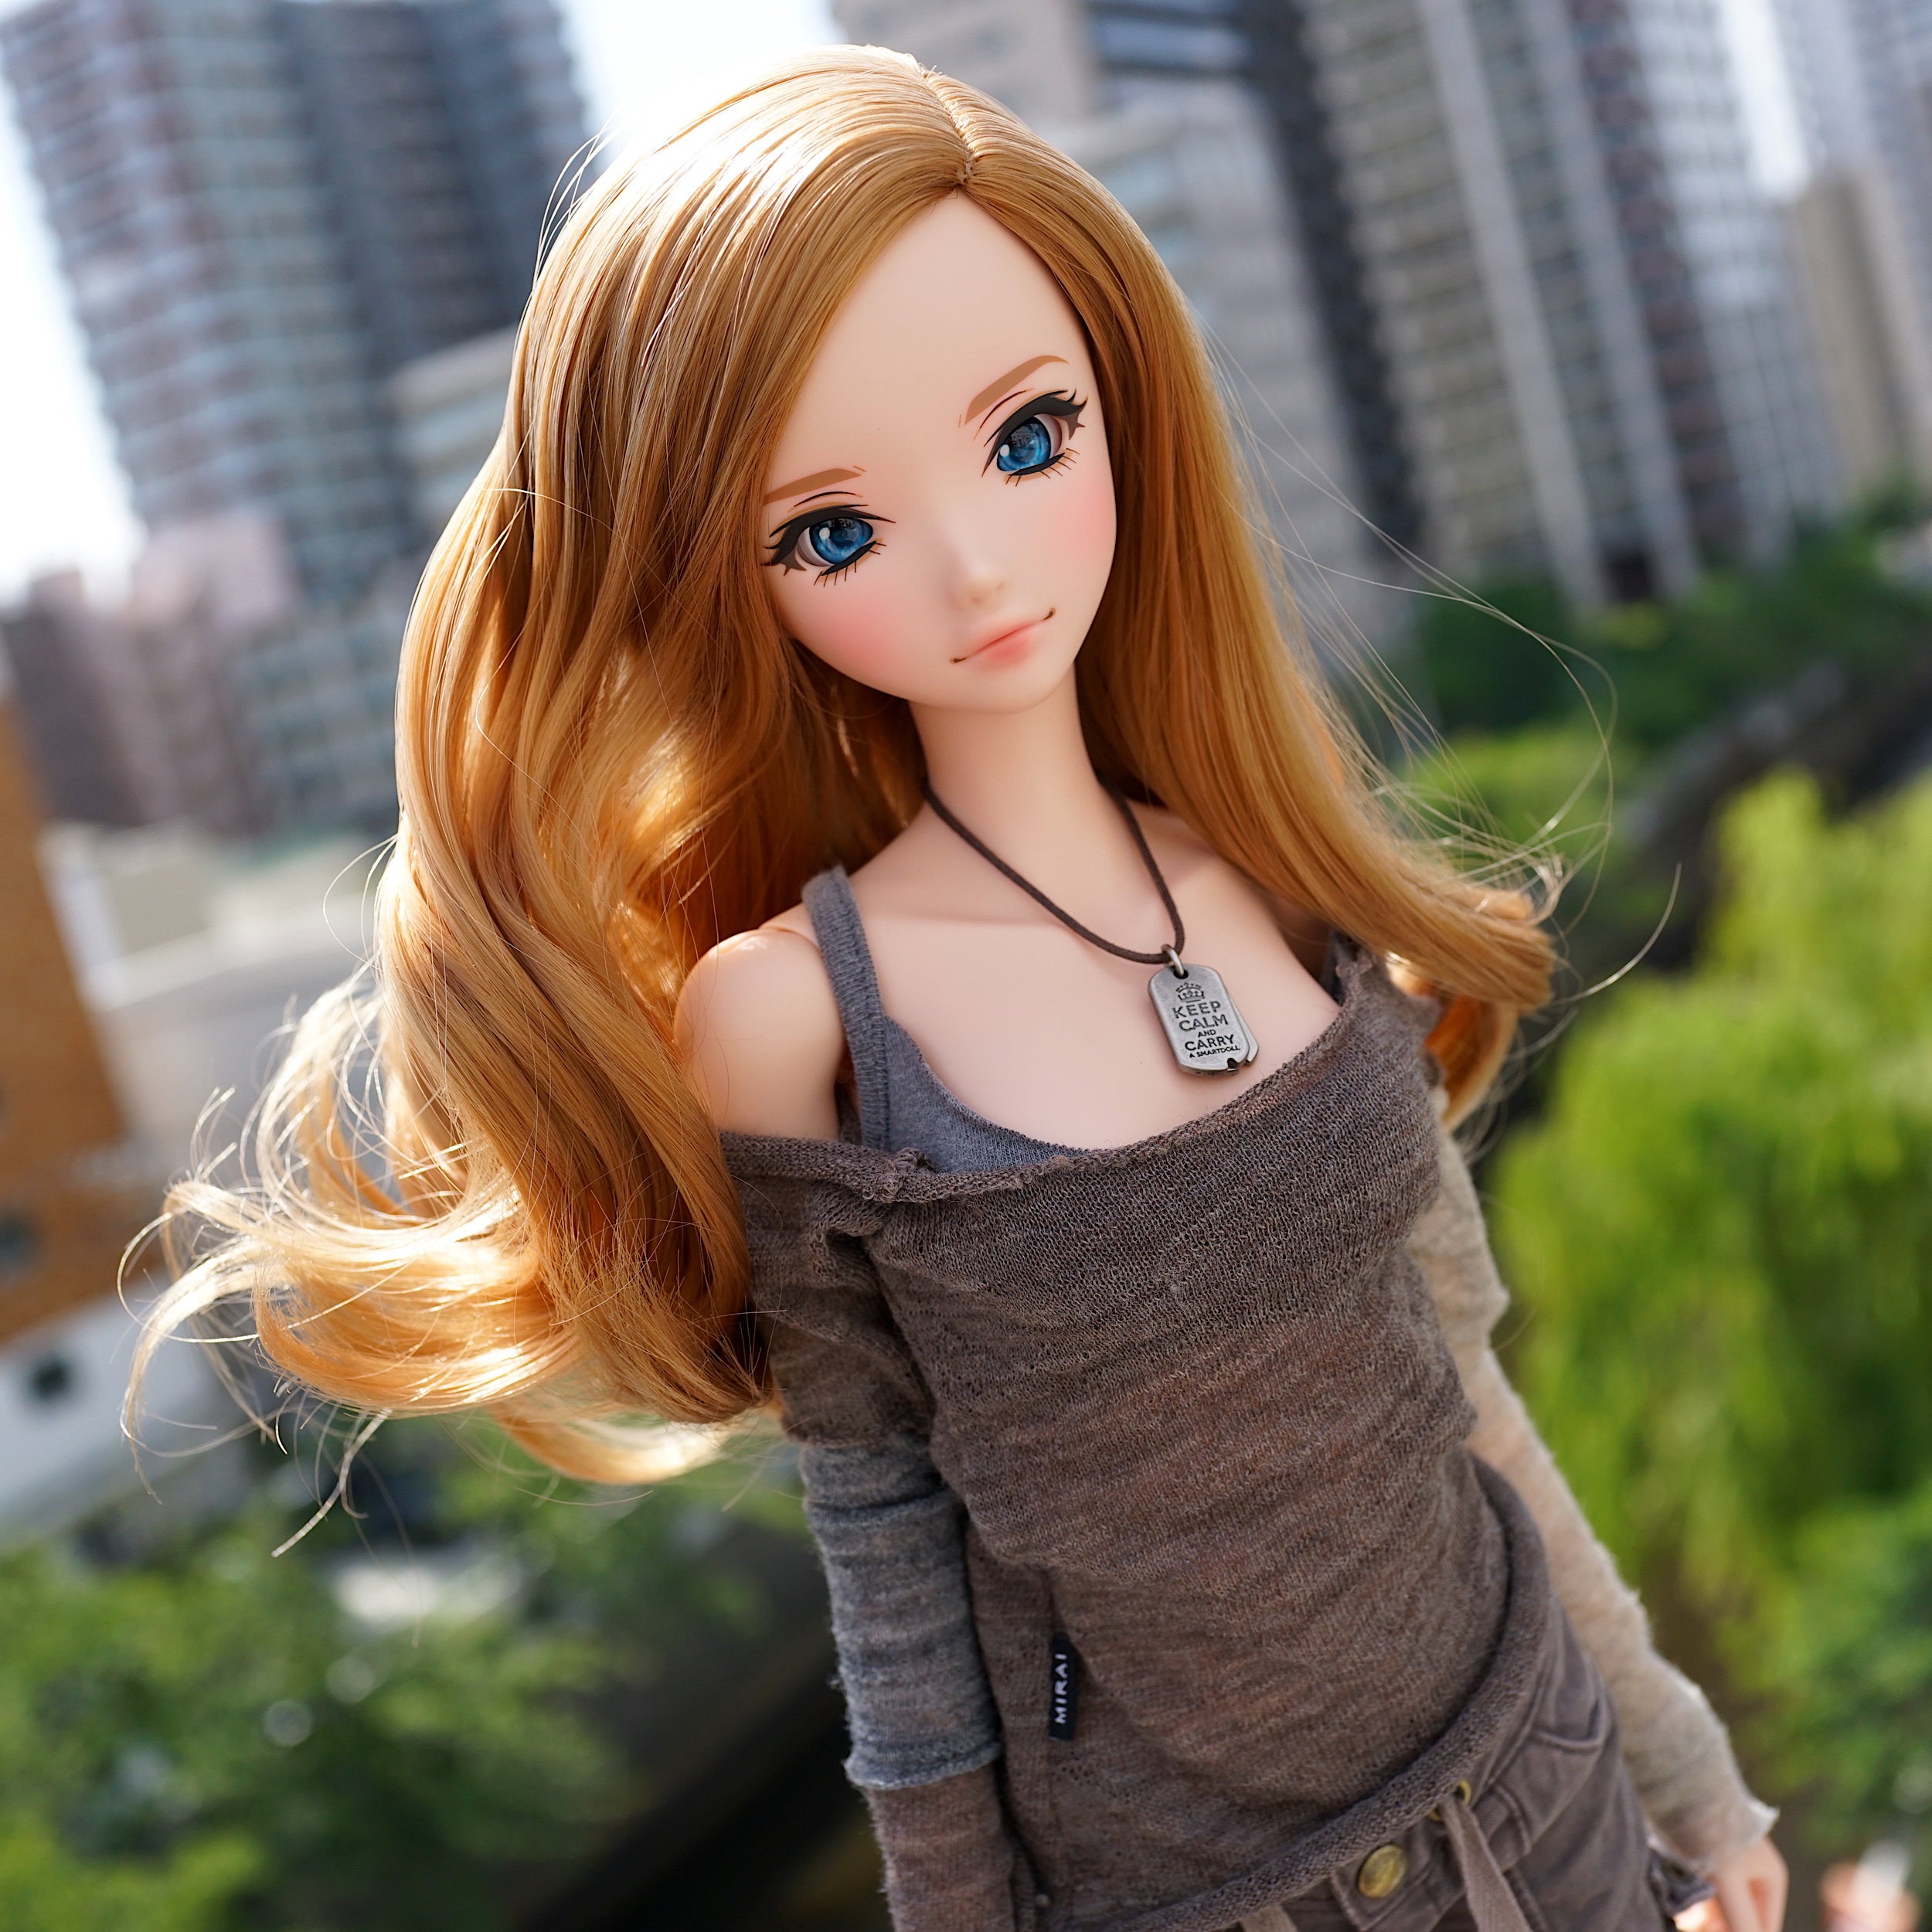 Smart Doll - Independence – Smart Doll Store